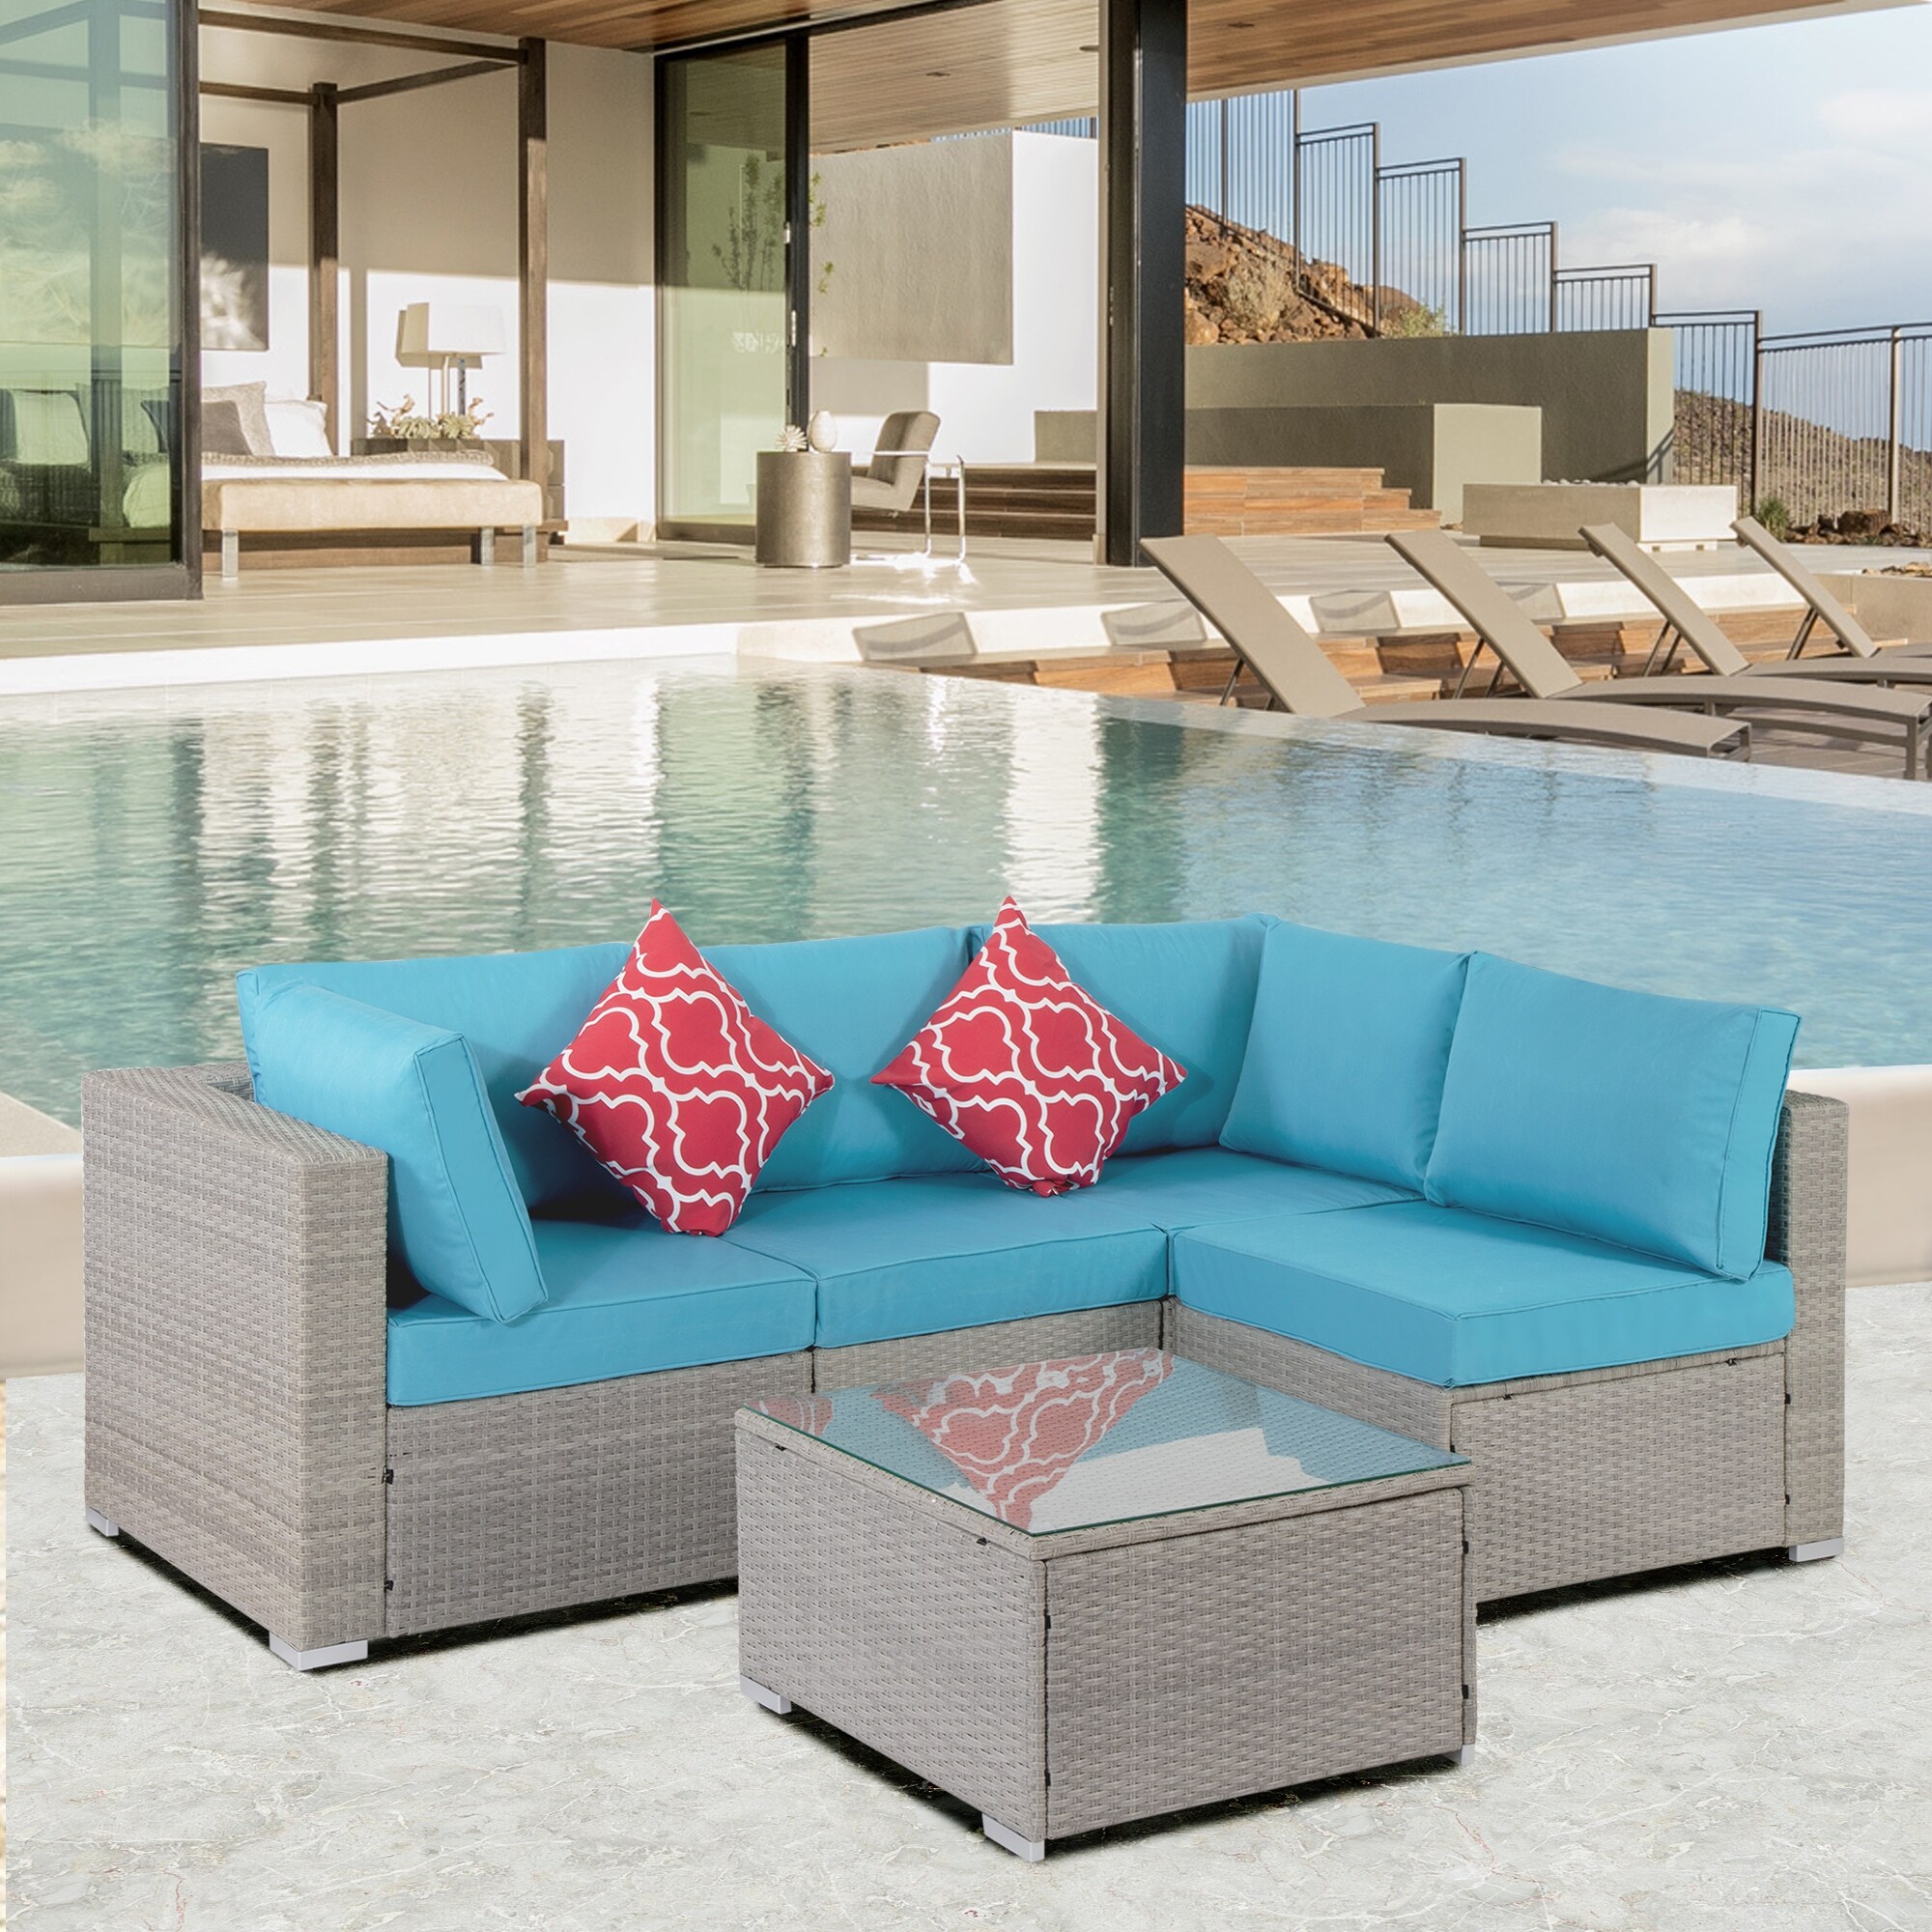 5-pieces Outdoor Patio Furniture Sets For 4-5  Garden Sofa Set With 2 Single Sofa Chair  2 Single Corner Chair and 1 Coffee Table.